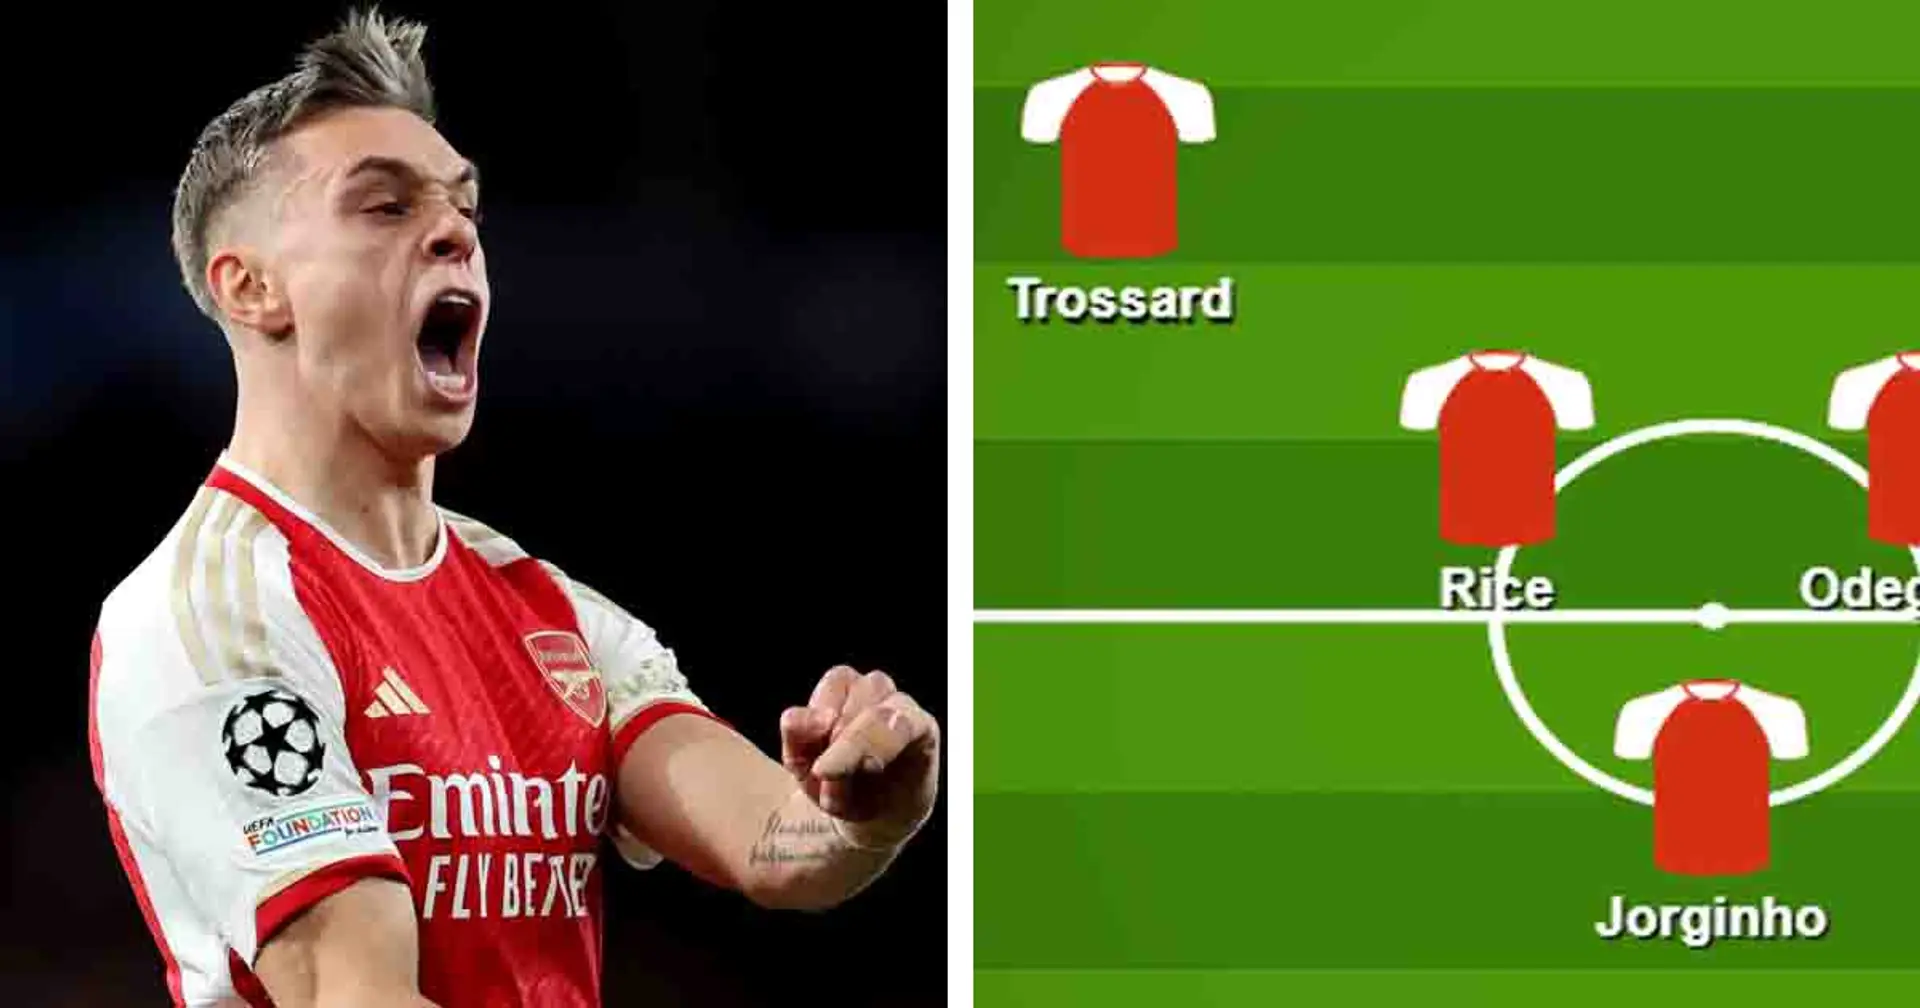 Arsenal's ideal XI for Bayern Munich return leg with three changes - shown in lineup